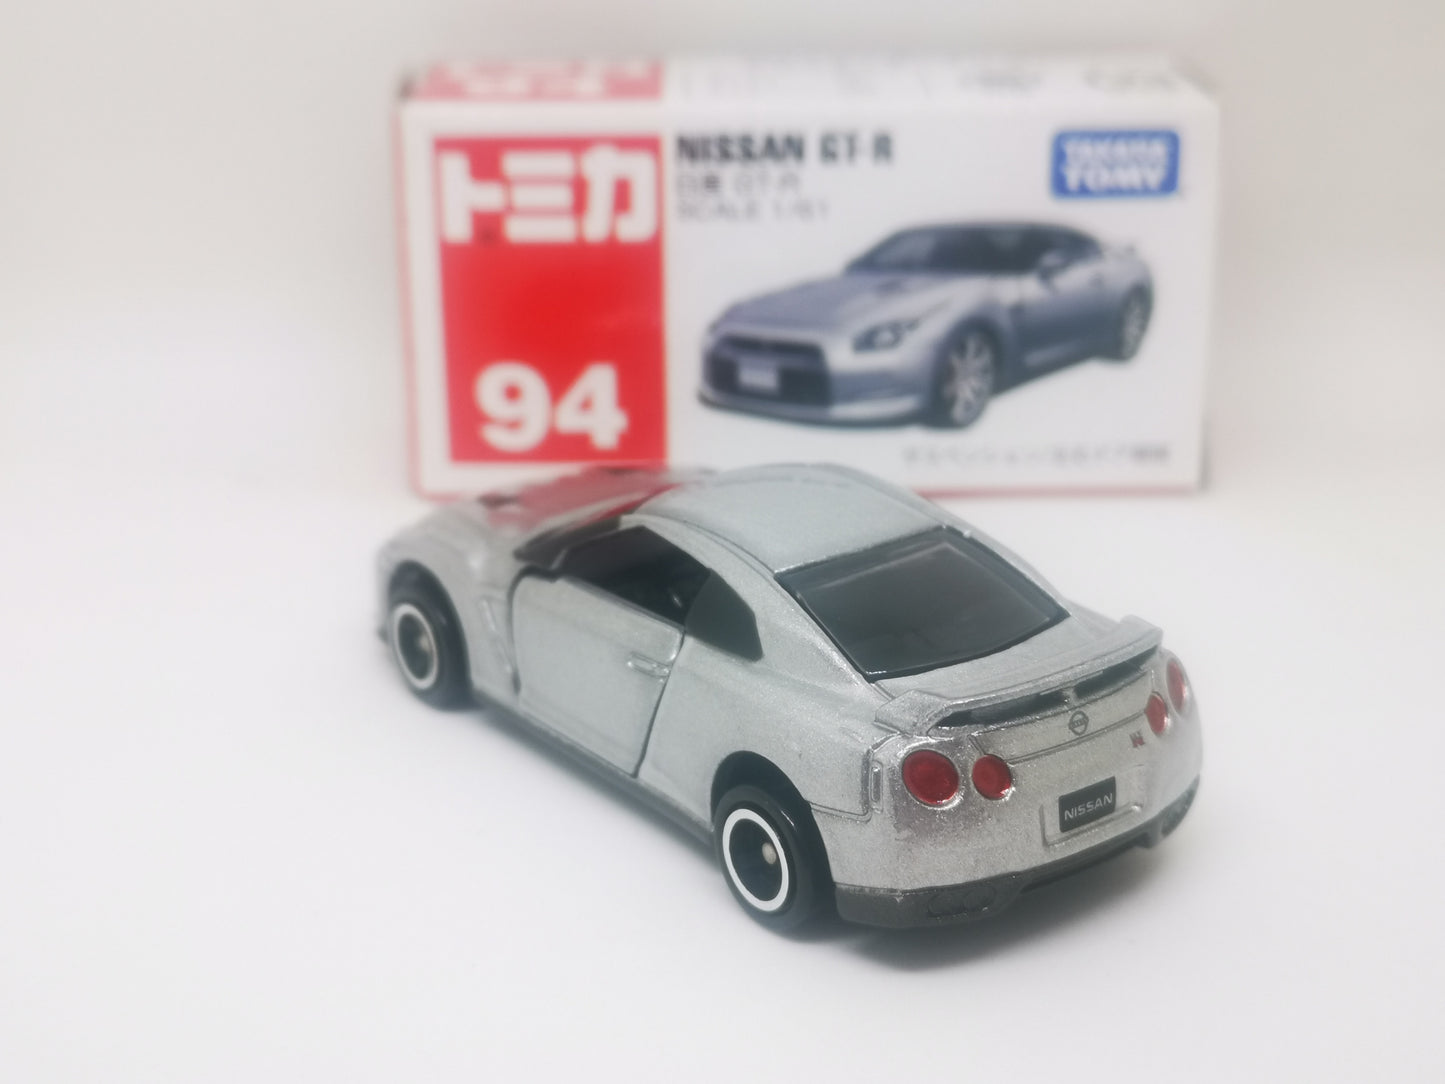 Tomica #94 Nissan GT-R 1:61 Scale